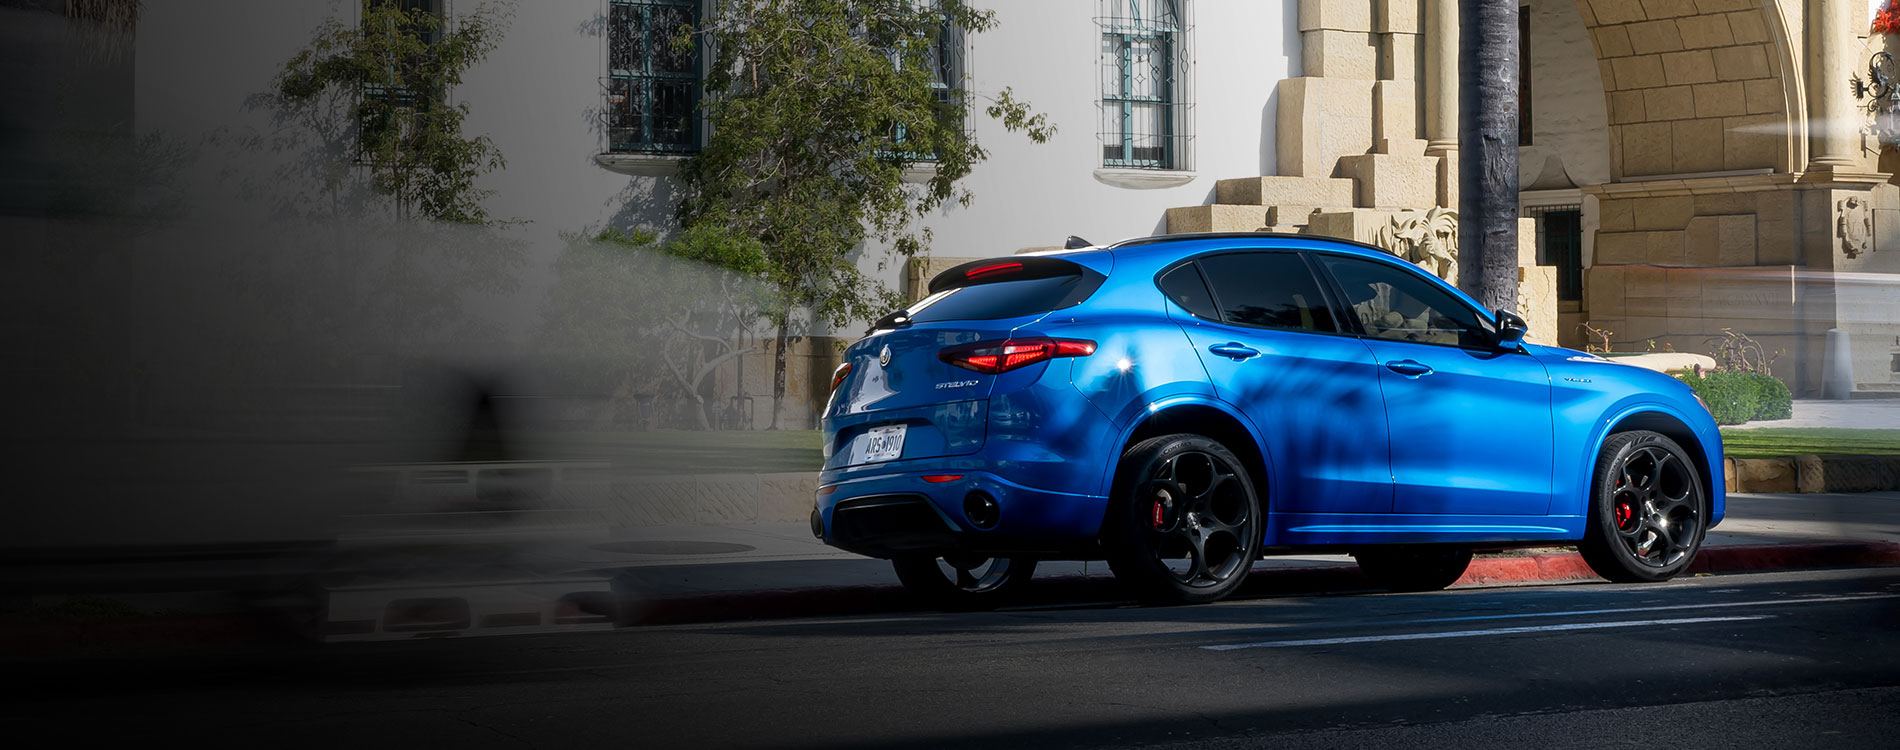 Rear 3/4 shot of a blue Stelvio parked on a road side